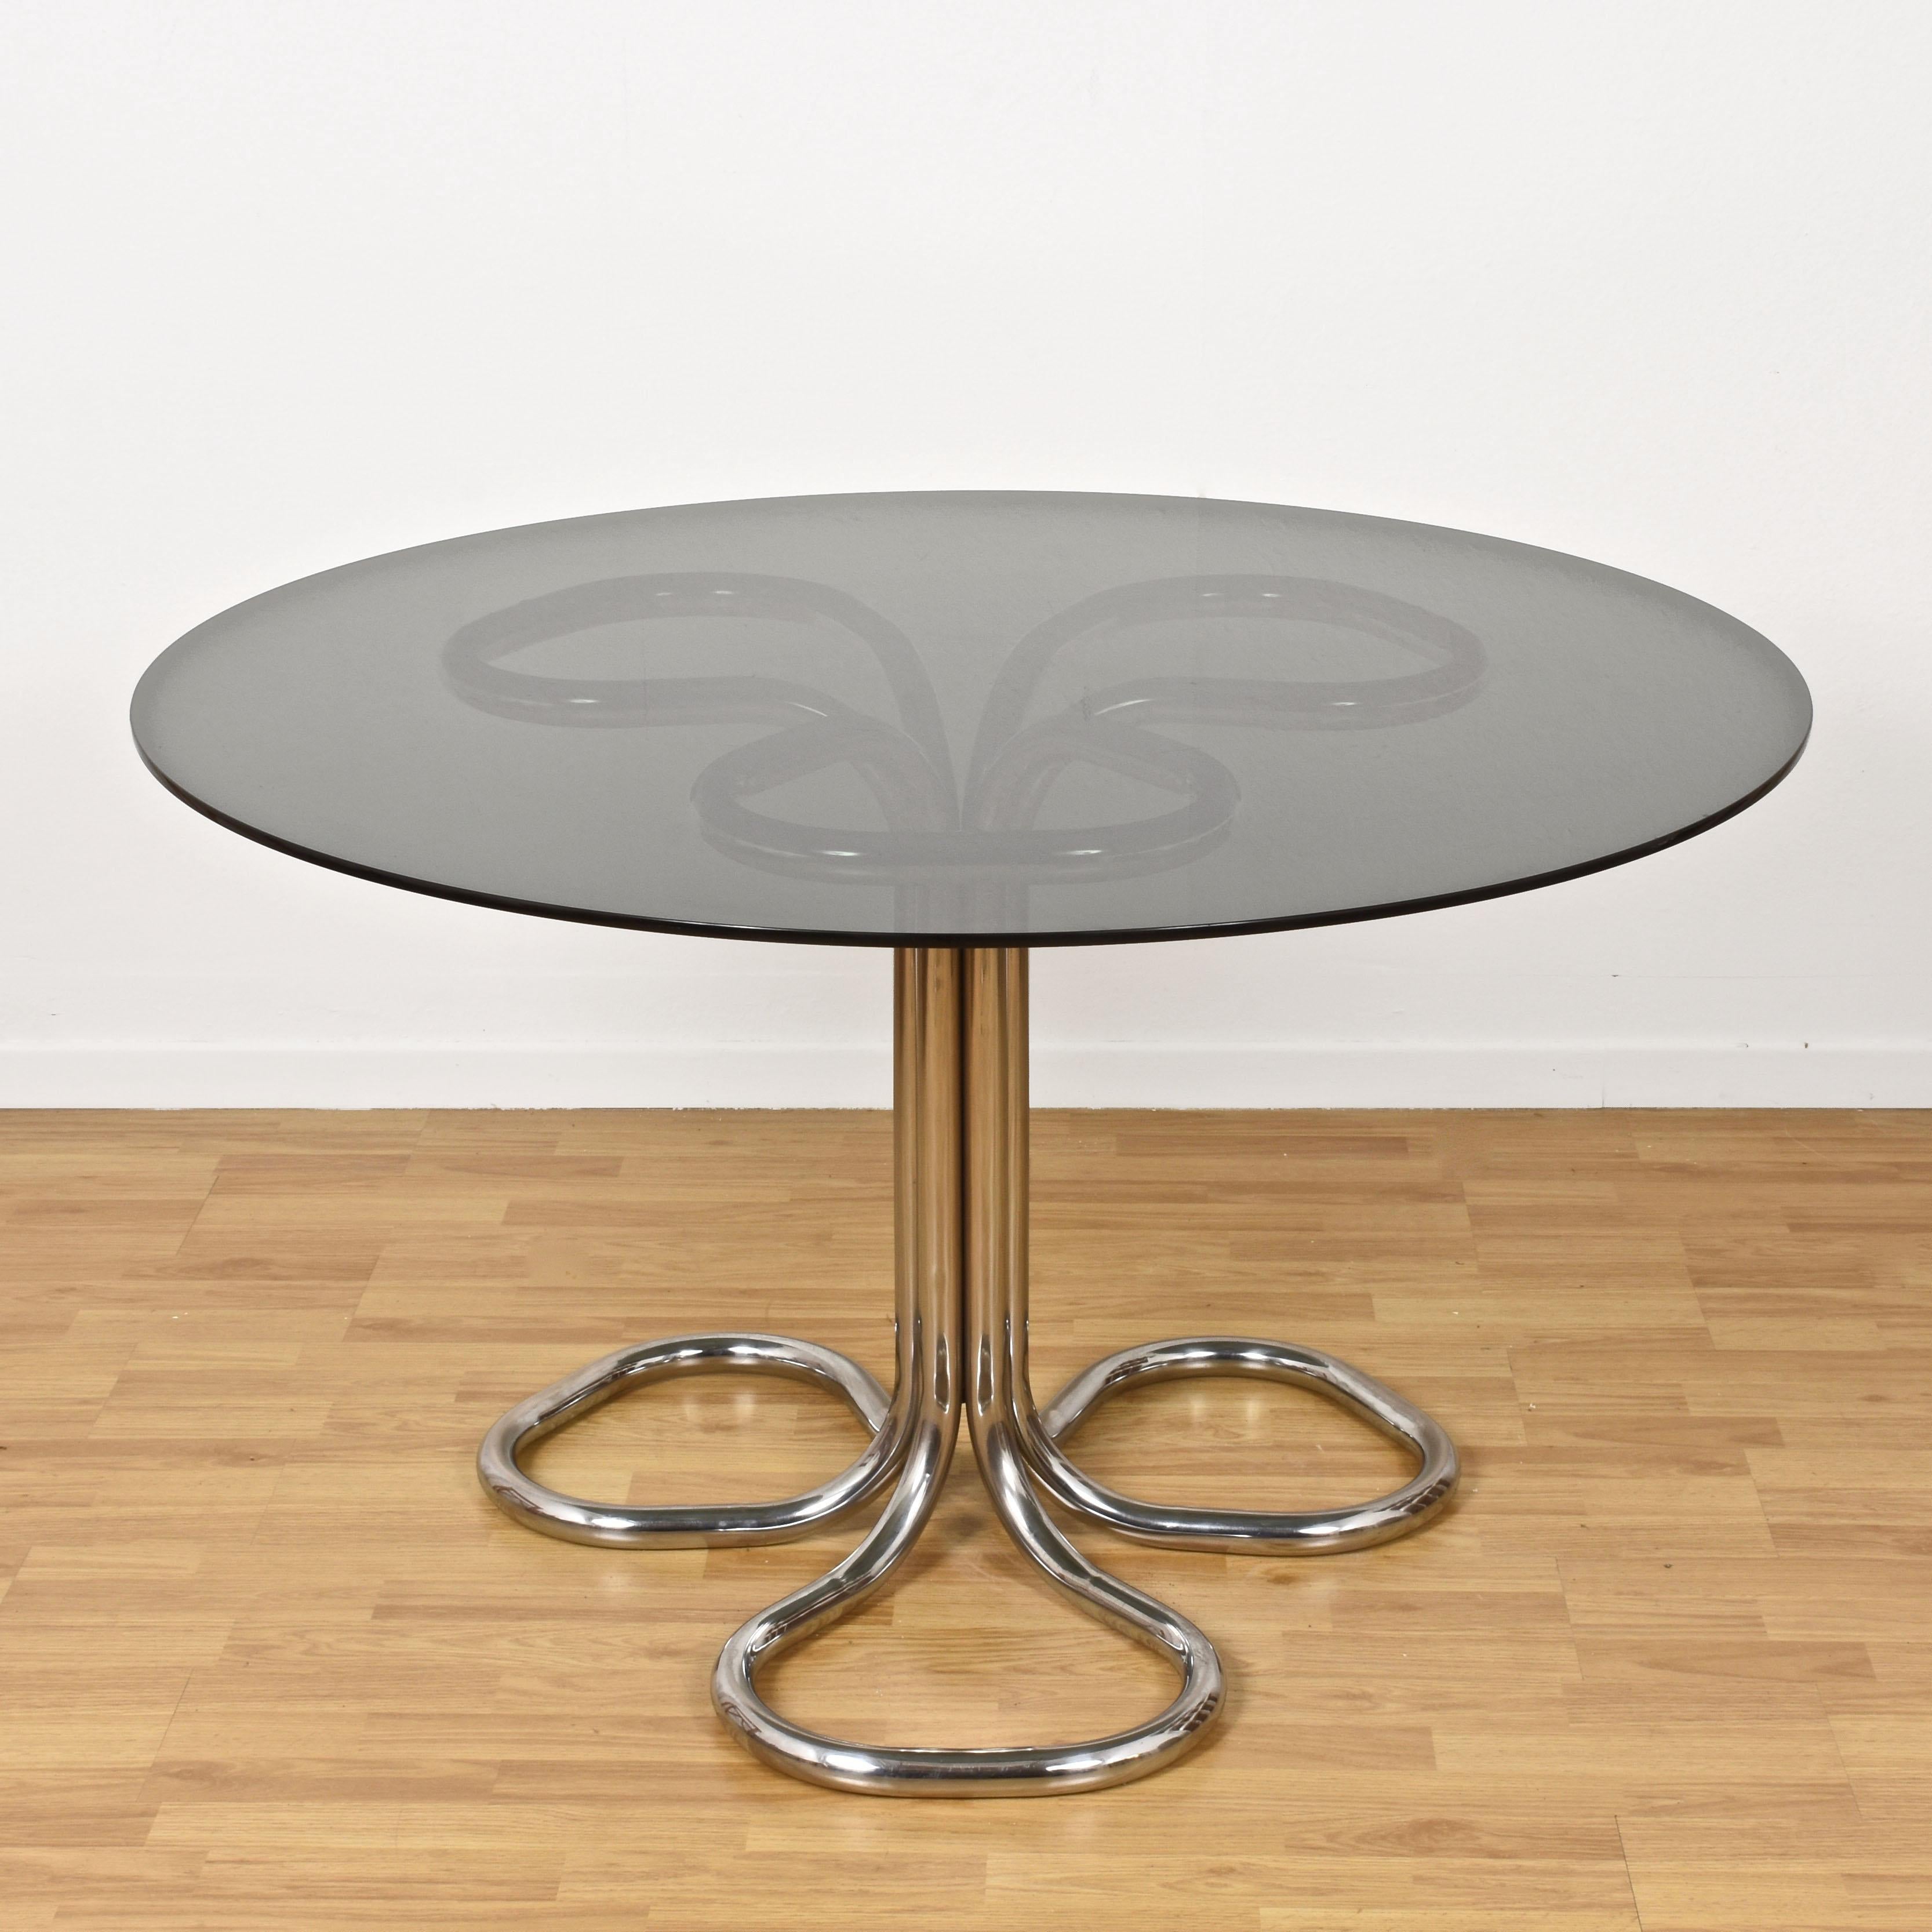 Italian Chrome Base Smoked Glass Top Dining Table, Giotto Stoppino, Italy, 1970s 1